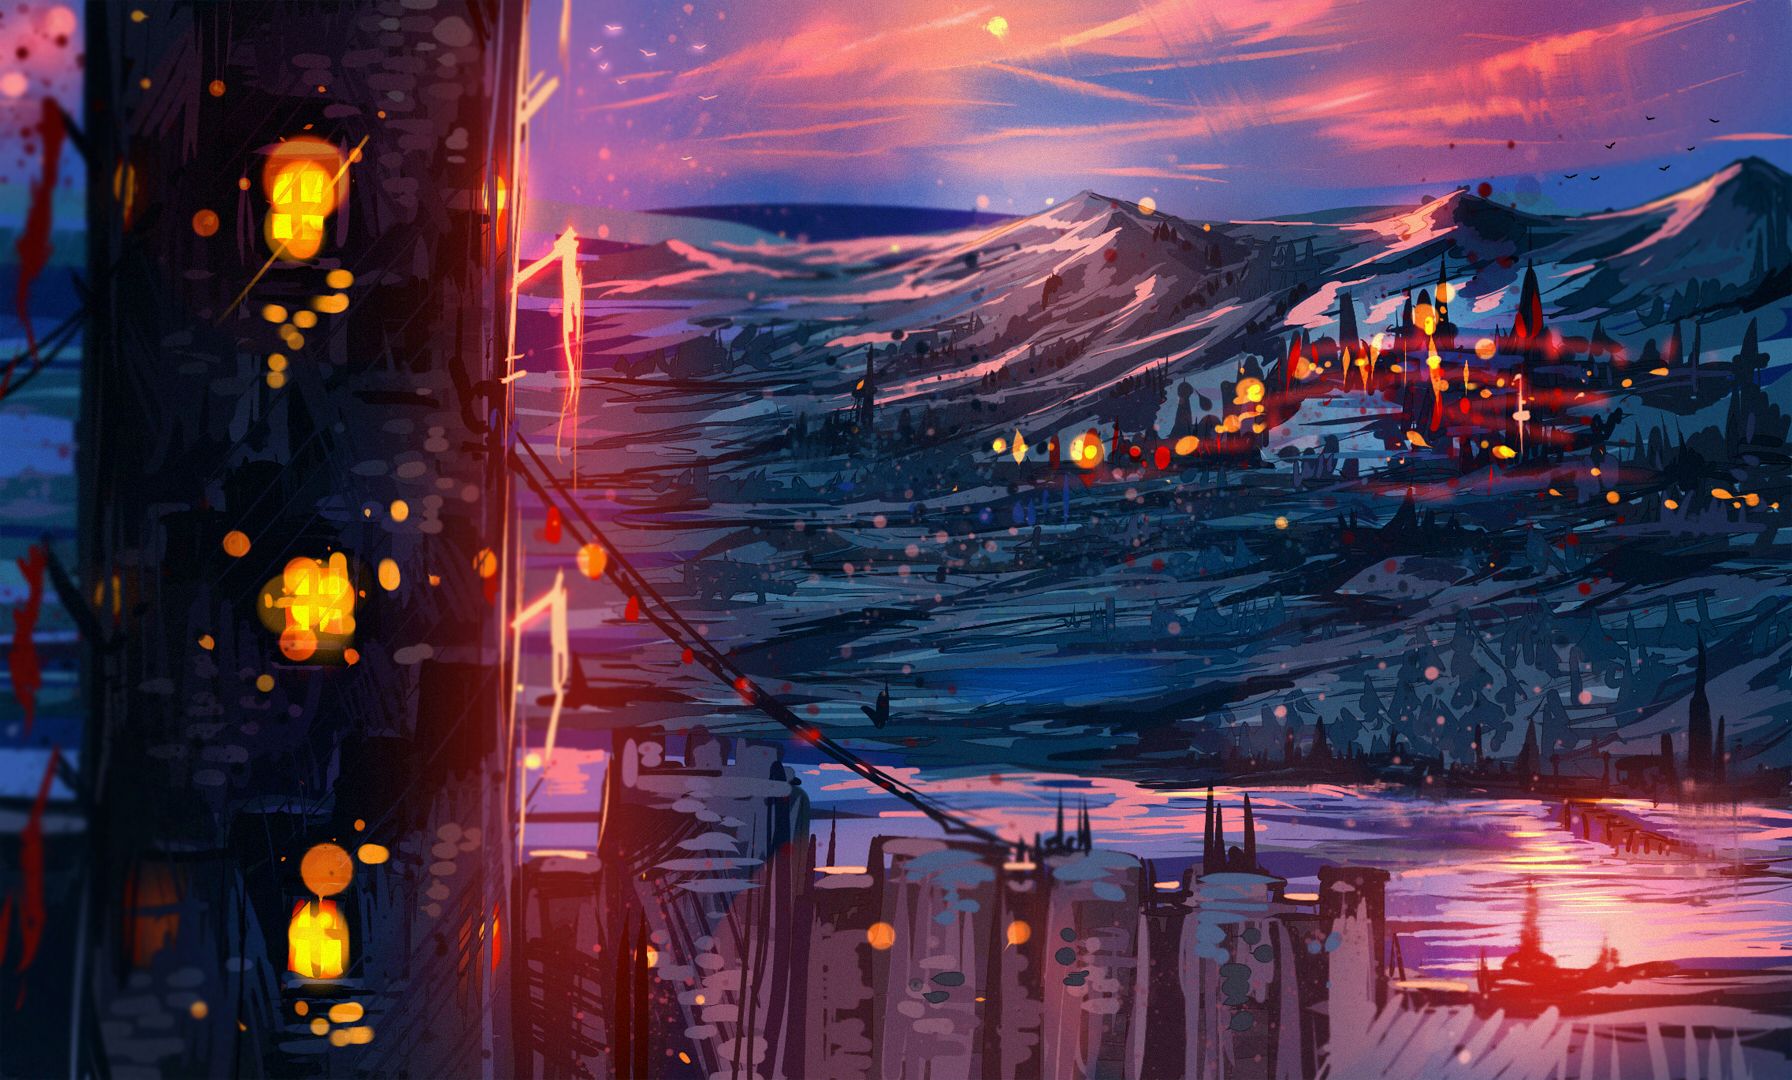 Ryky Painting Digital Art Cityscape Mountains Wallpaper:1792x1080